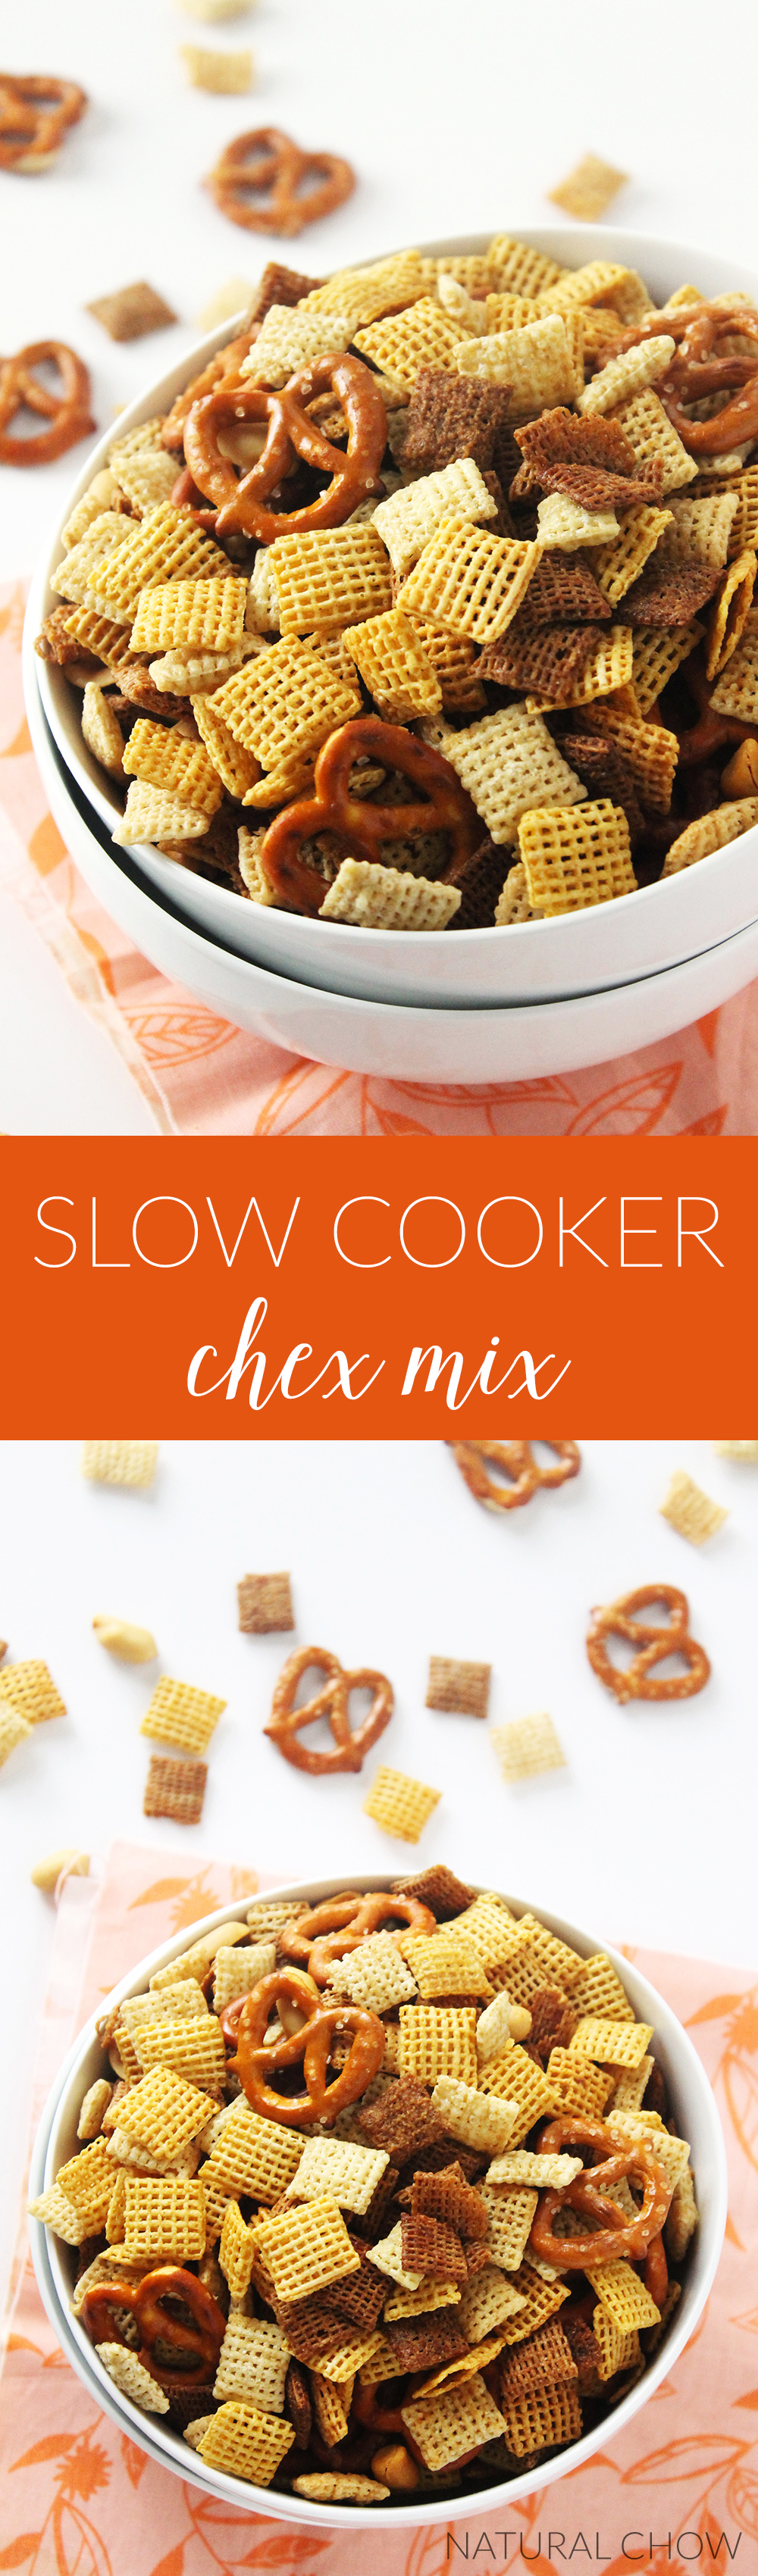 This slow cooker chex mix is super to make and is perfect for parties! Made with all-natural ingredients, this delicious snack is healthy and delicious.